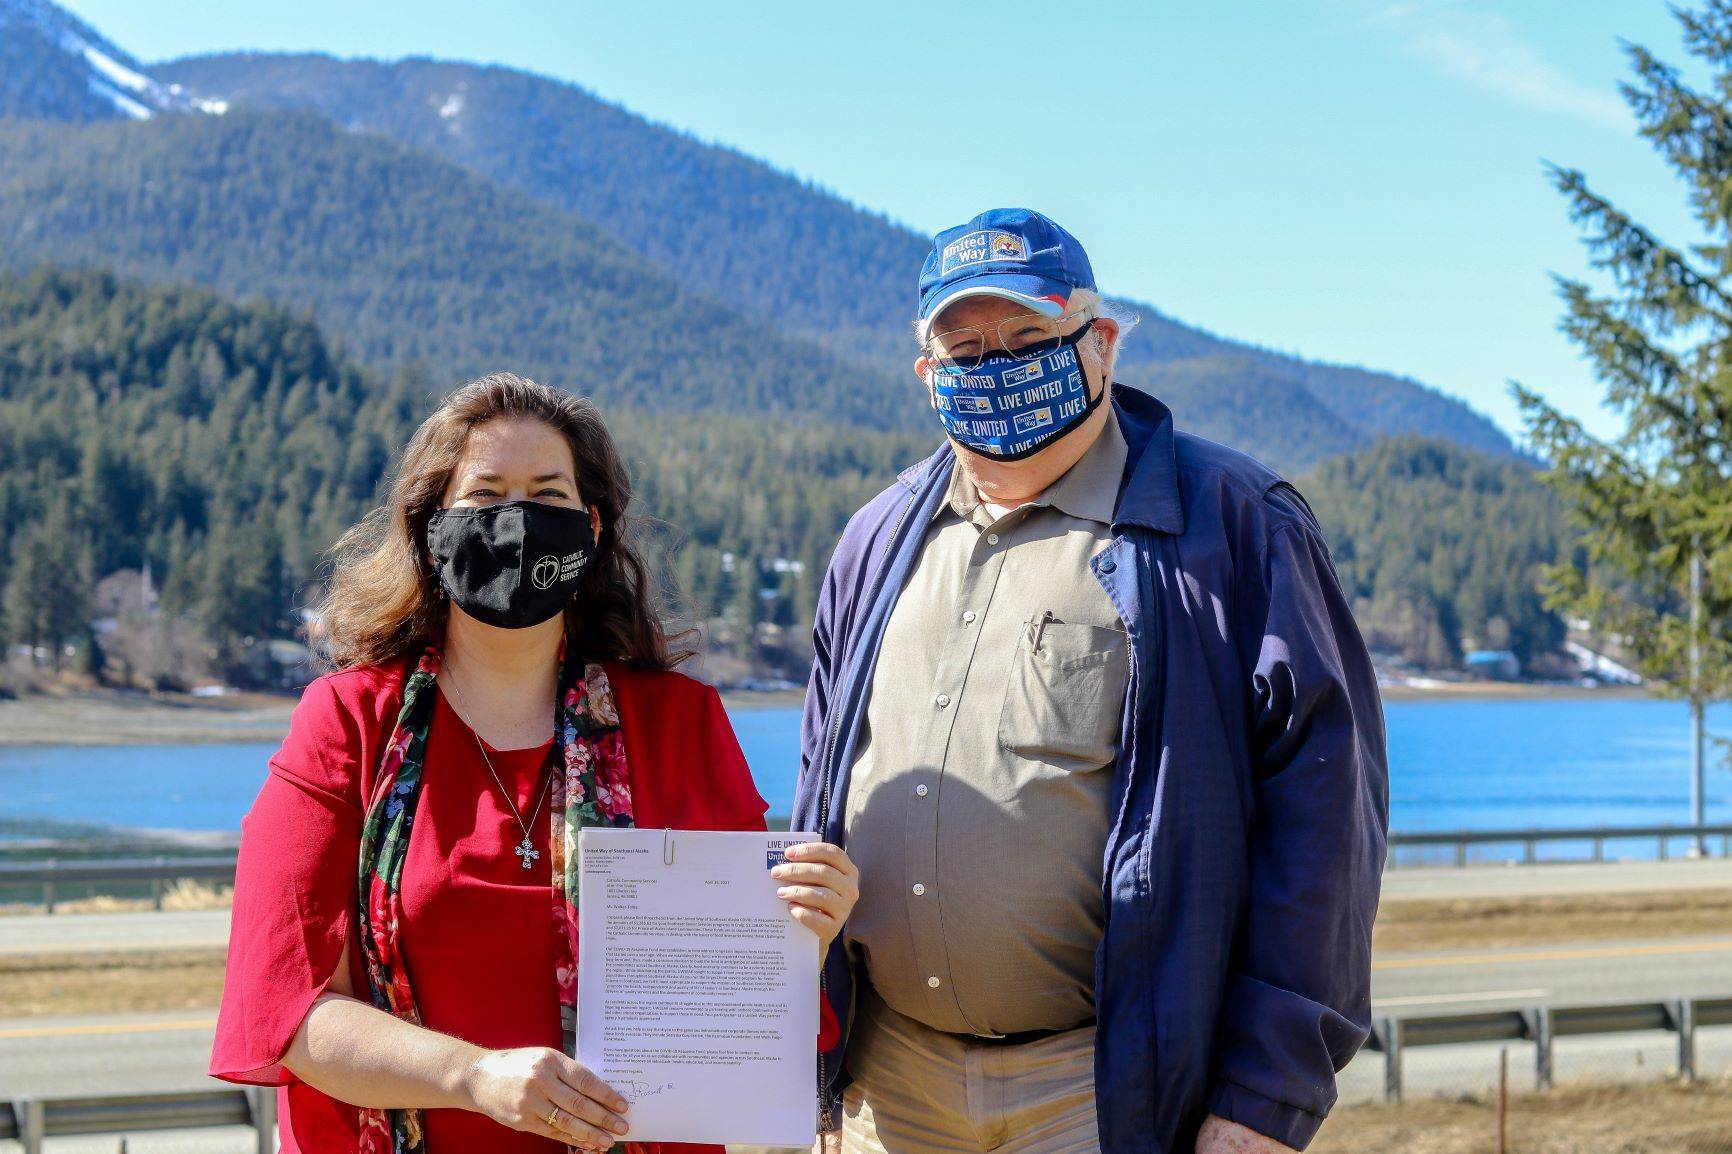 Courtesy Photo
Erin Walker-Tolles, executive director of Catholic Community Service, stands with Wayne Stevens, president and CEO of United Way of Southeast Alaska. CCS was among the organizations to receive grant funding from UWSEAK’s COVID-19 Response Fund.